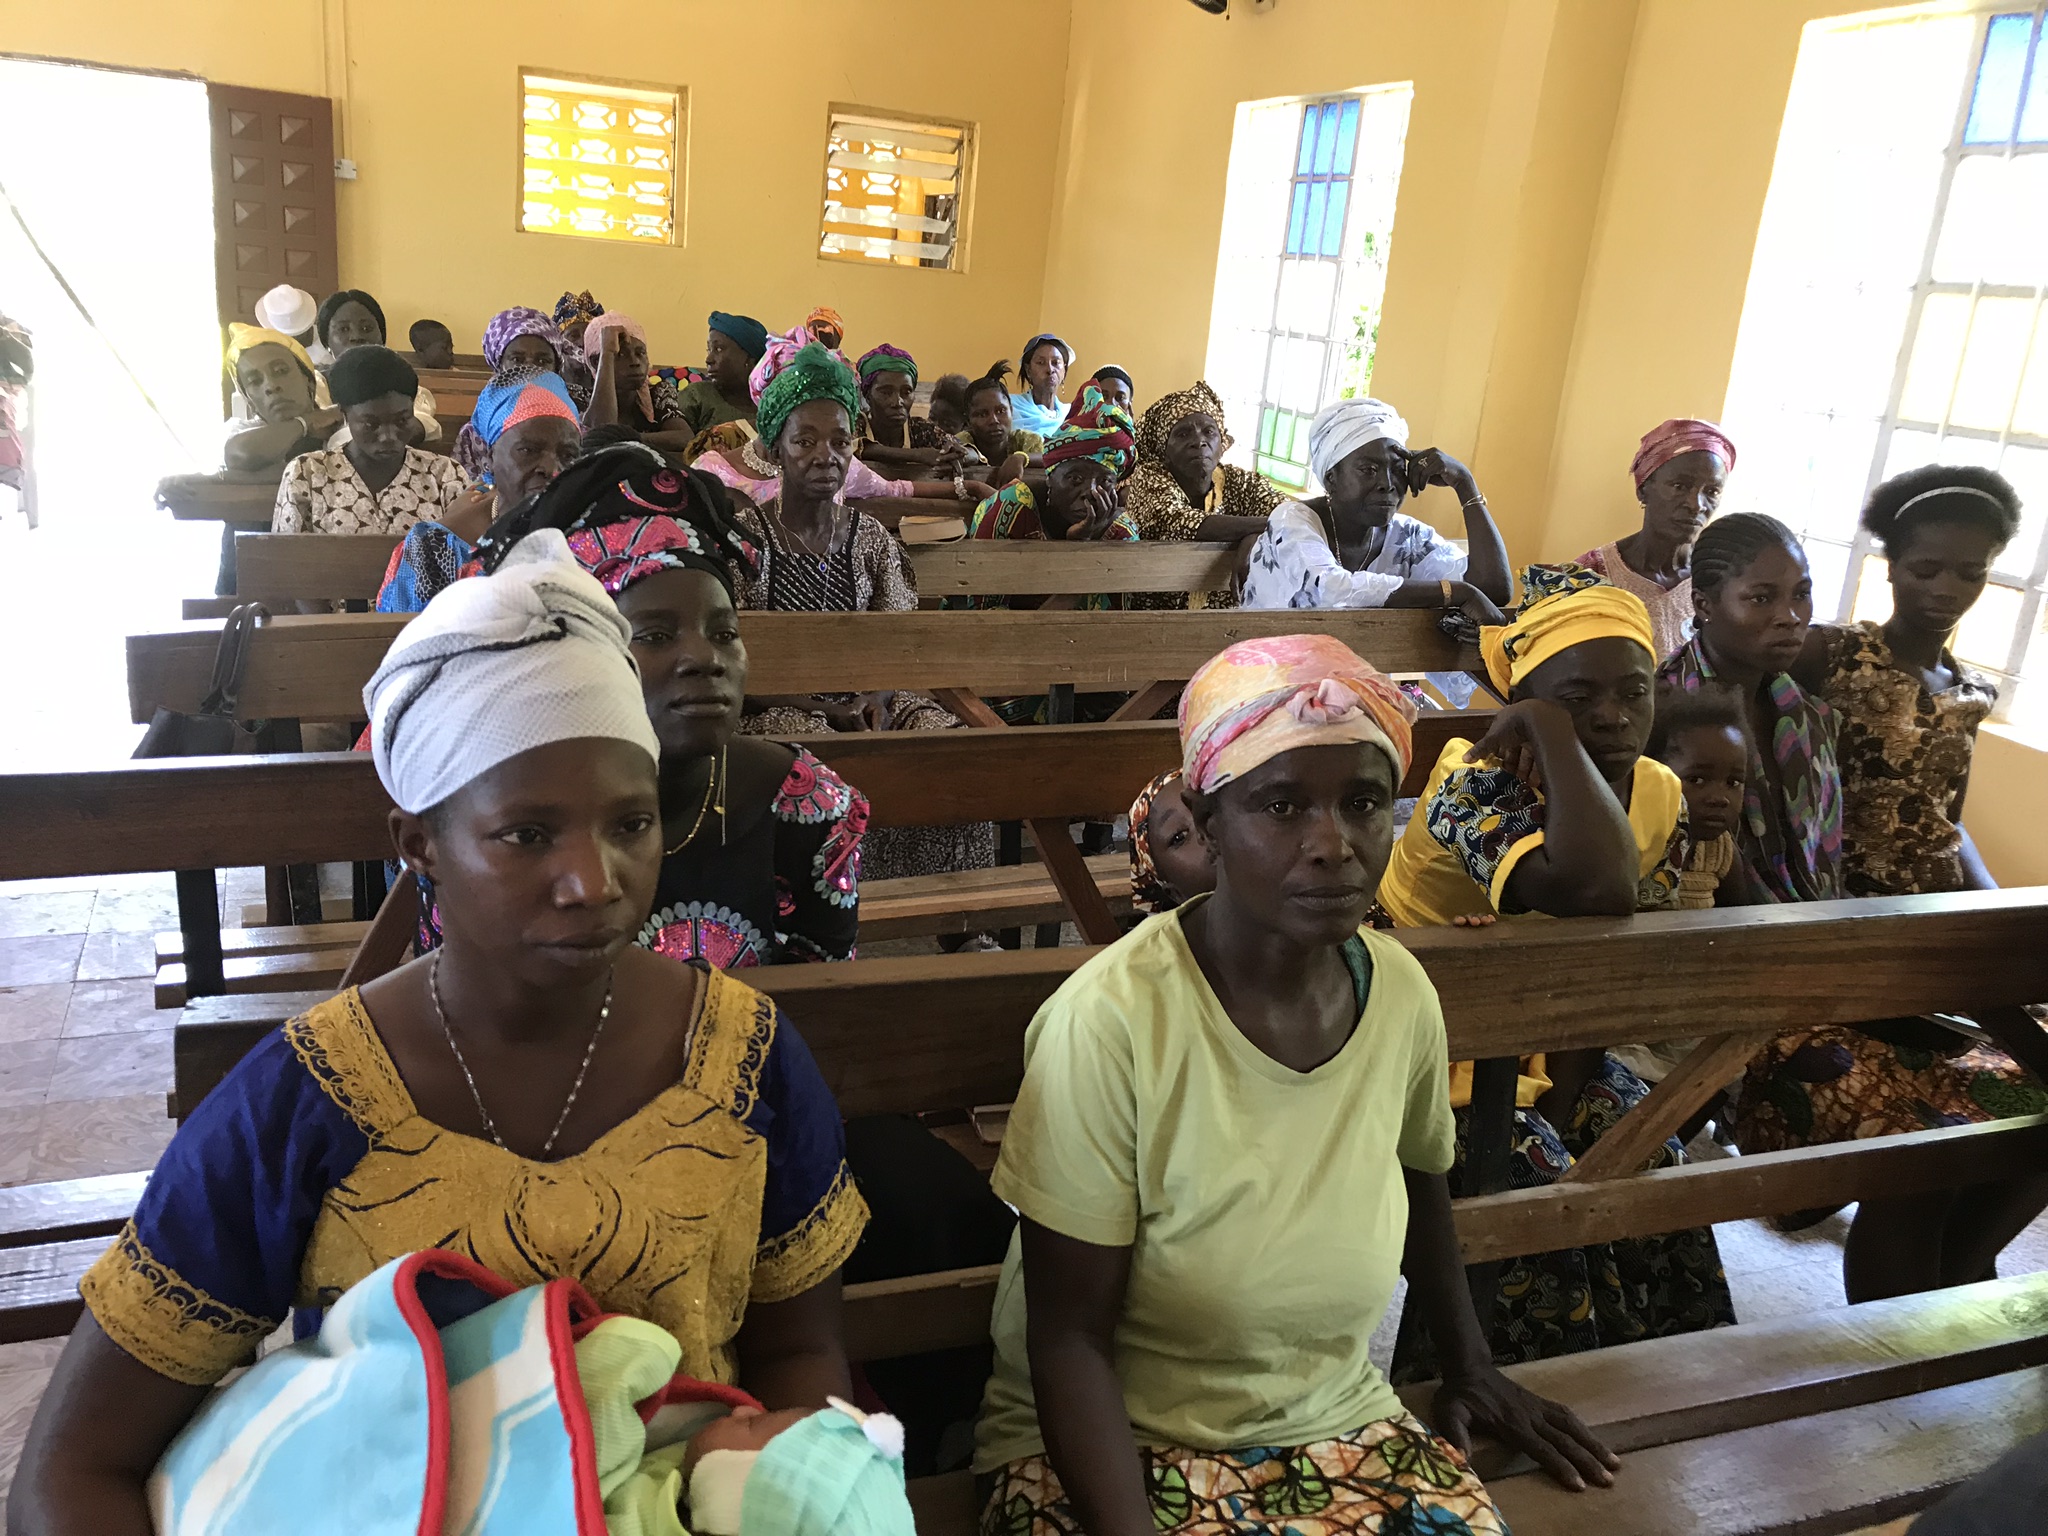  The congregation started thin but filled up as time went by.  In Kono, they speak both Kono and Krio.  And some speak English.  I communicated some with Tamba’s family in Krio. 